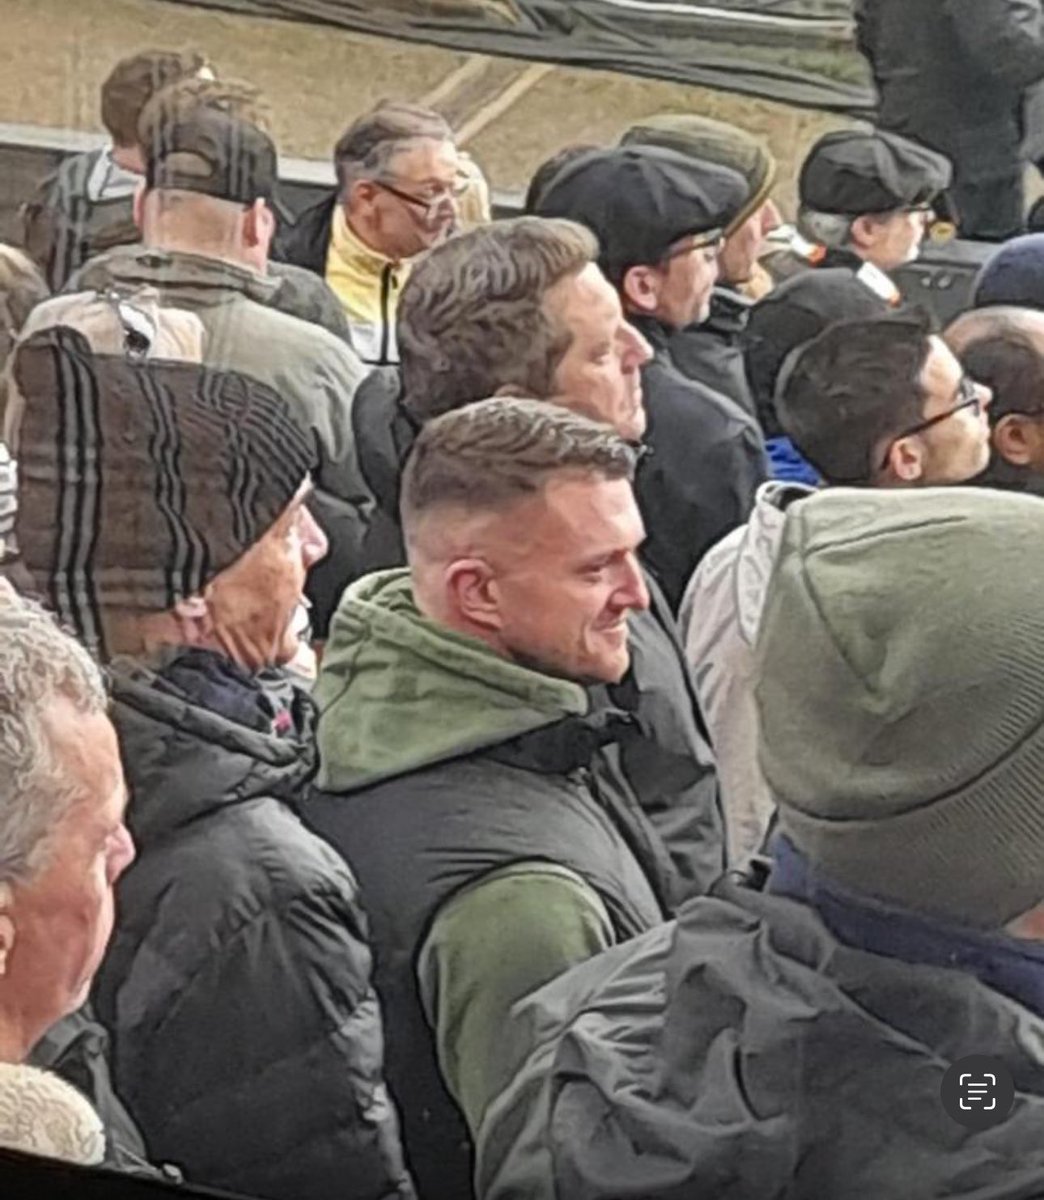 For any Evertonian wondering who to pledge allegiance to in the run in now that we’re safe: here’s Tommy Robinson in the Luton end today. Absolutely anyone else. 🙏